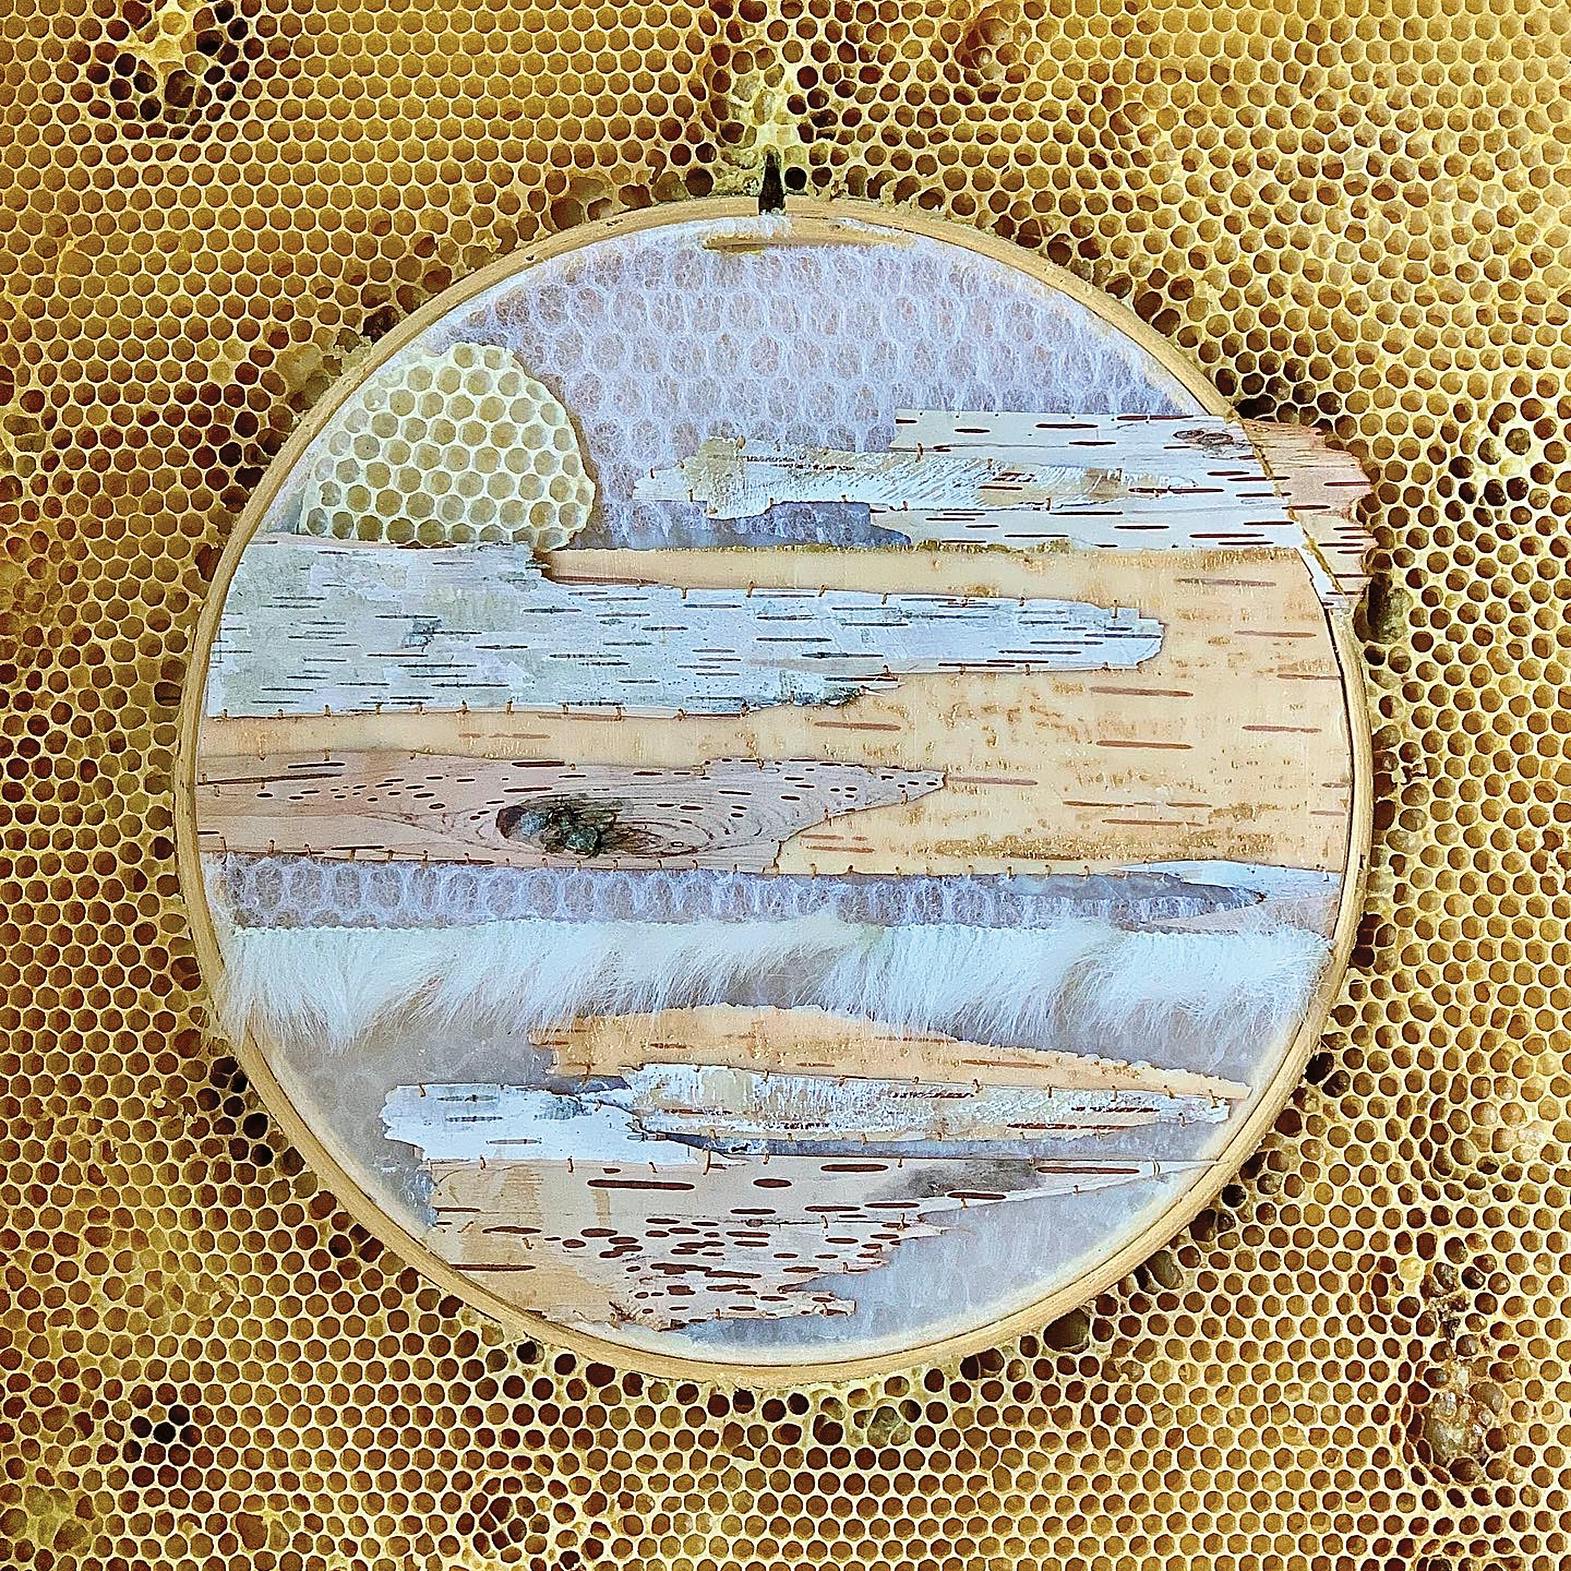 Embroidery hoop with blue fiber and beads embedded in honeycomb with bees